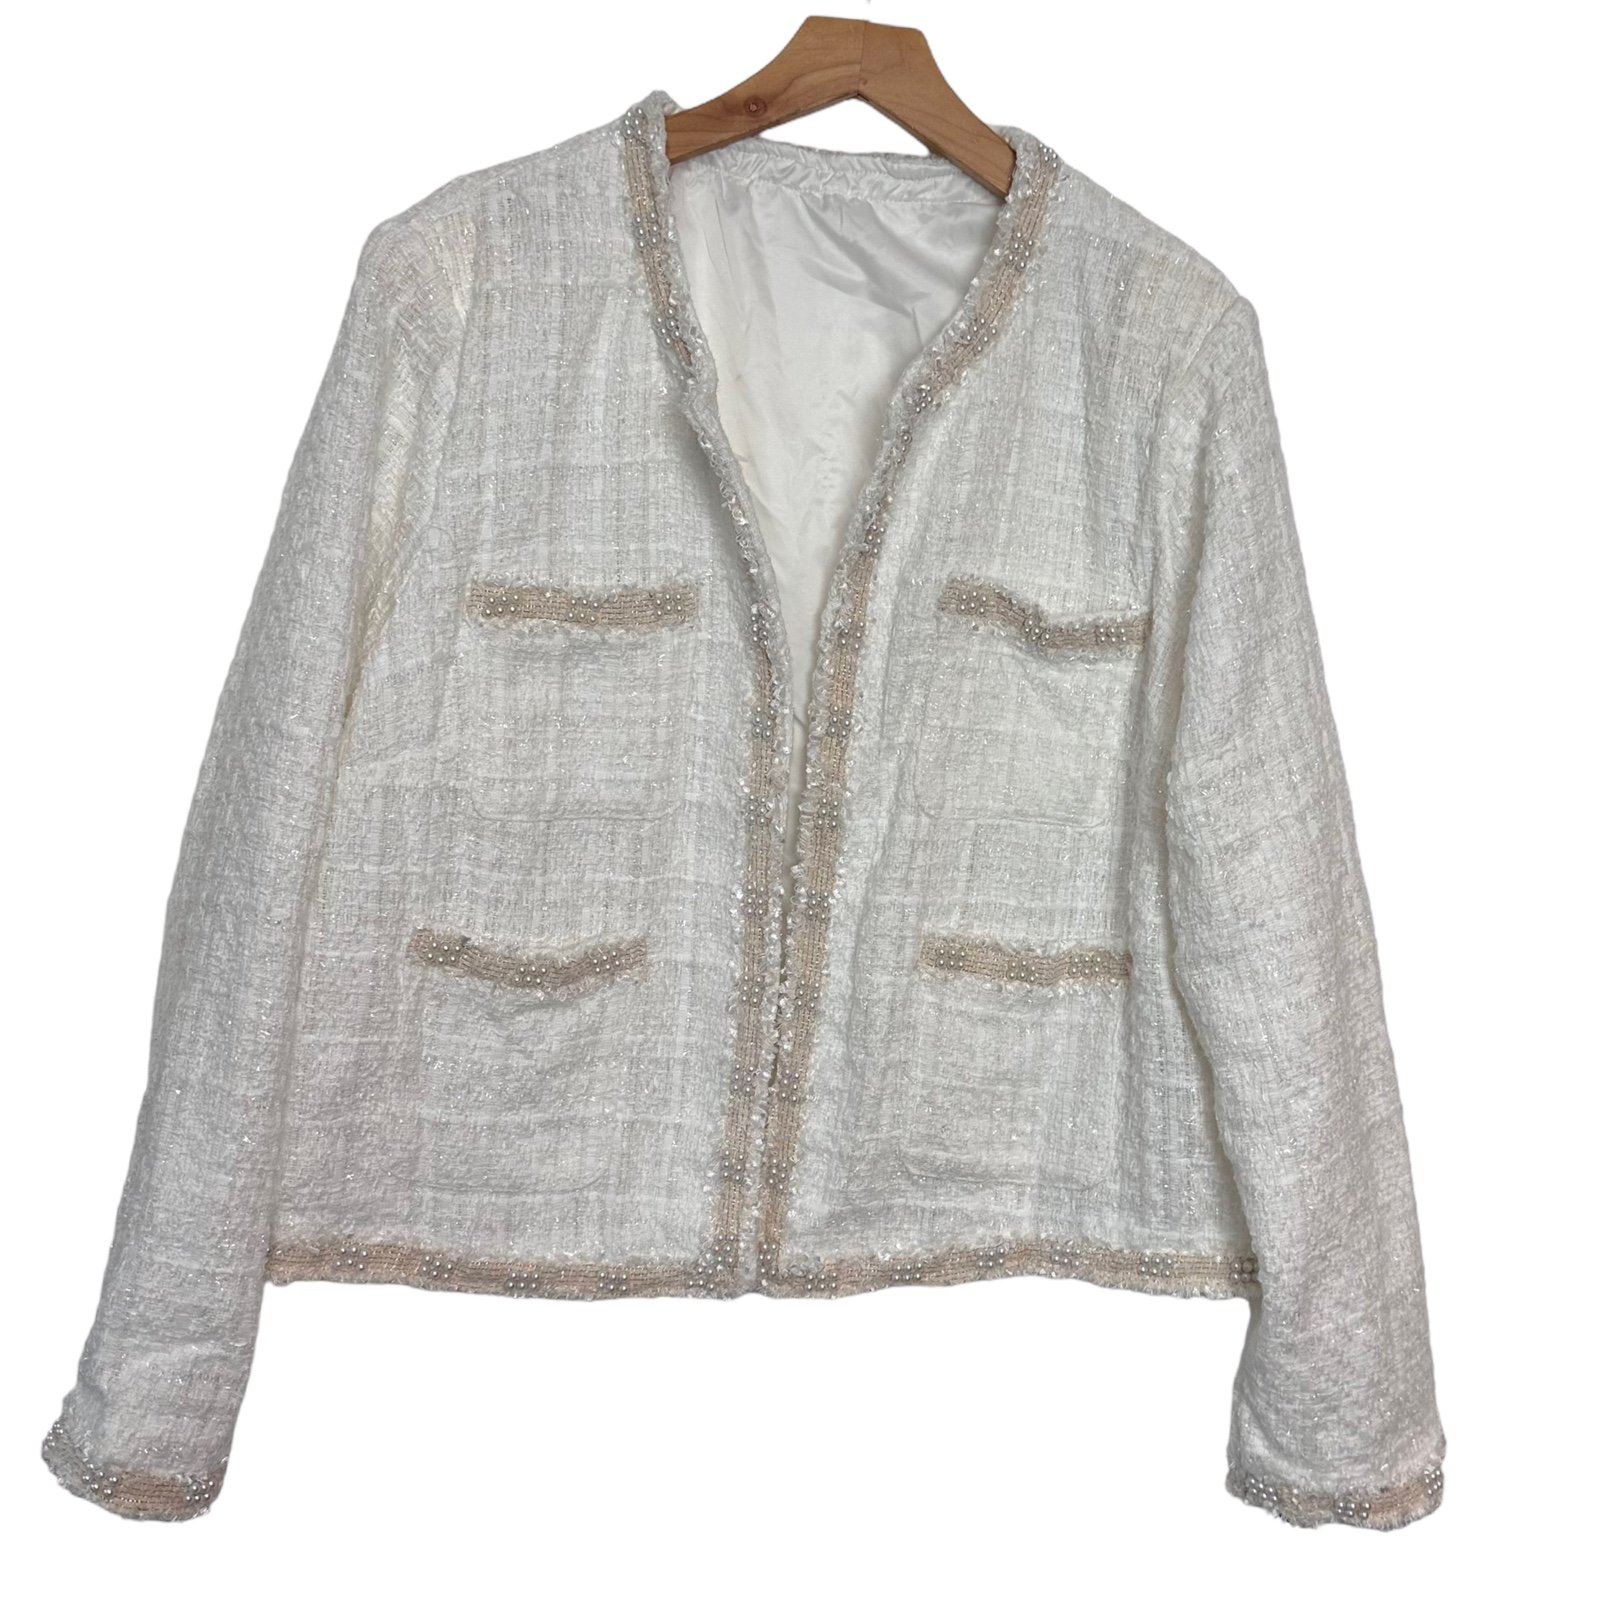 large discount Shein 3XL off white blazer with pearls e